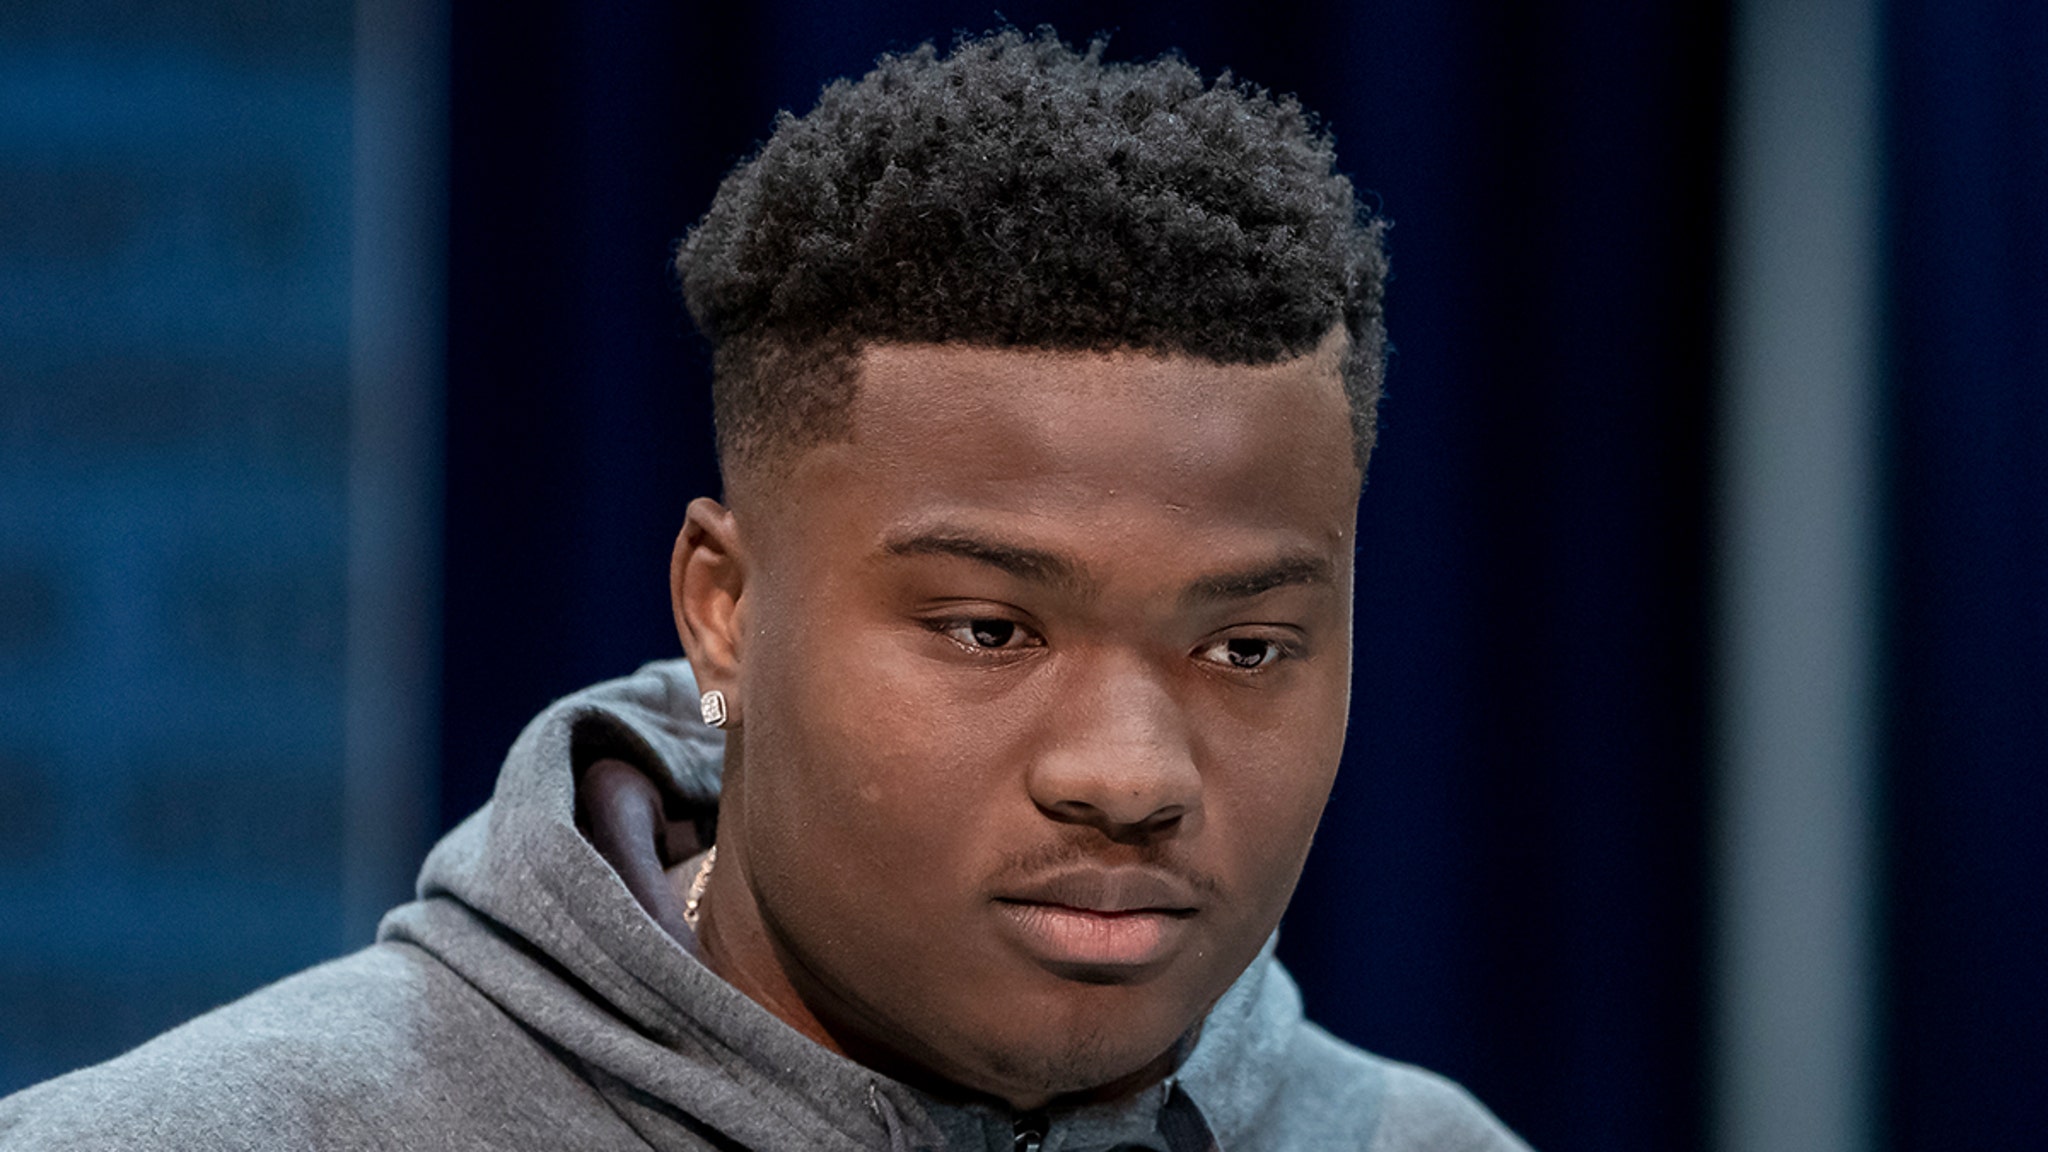 NFL’s Dwayne Haskins Dead At 24 After Being Hit By Car